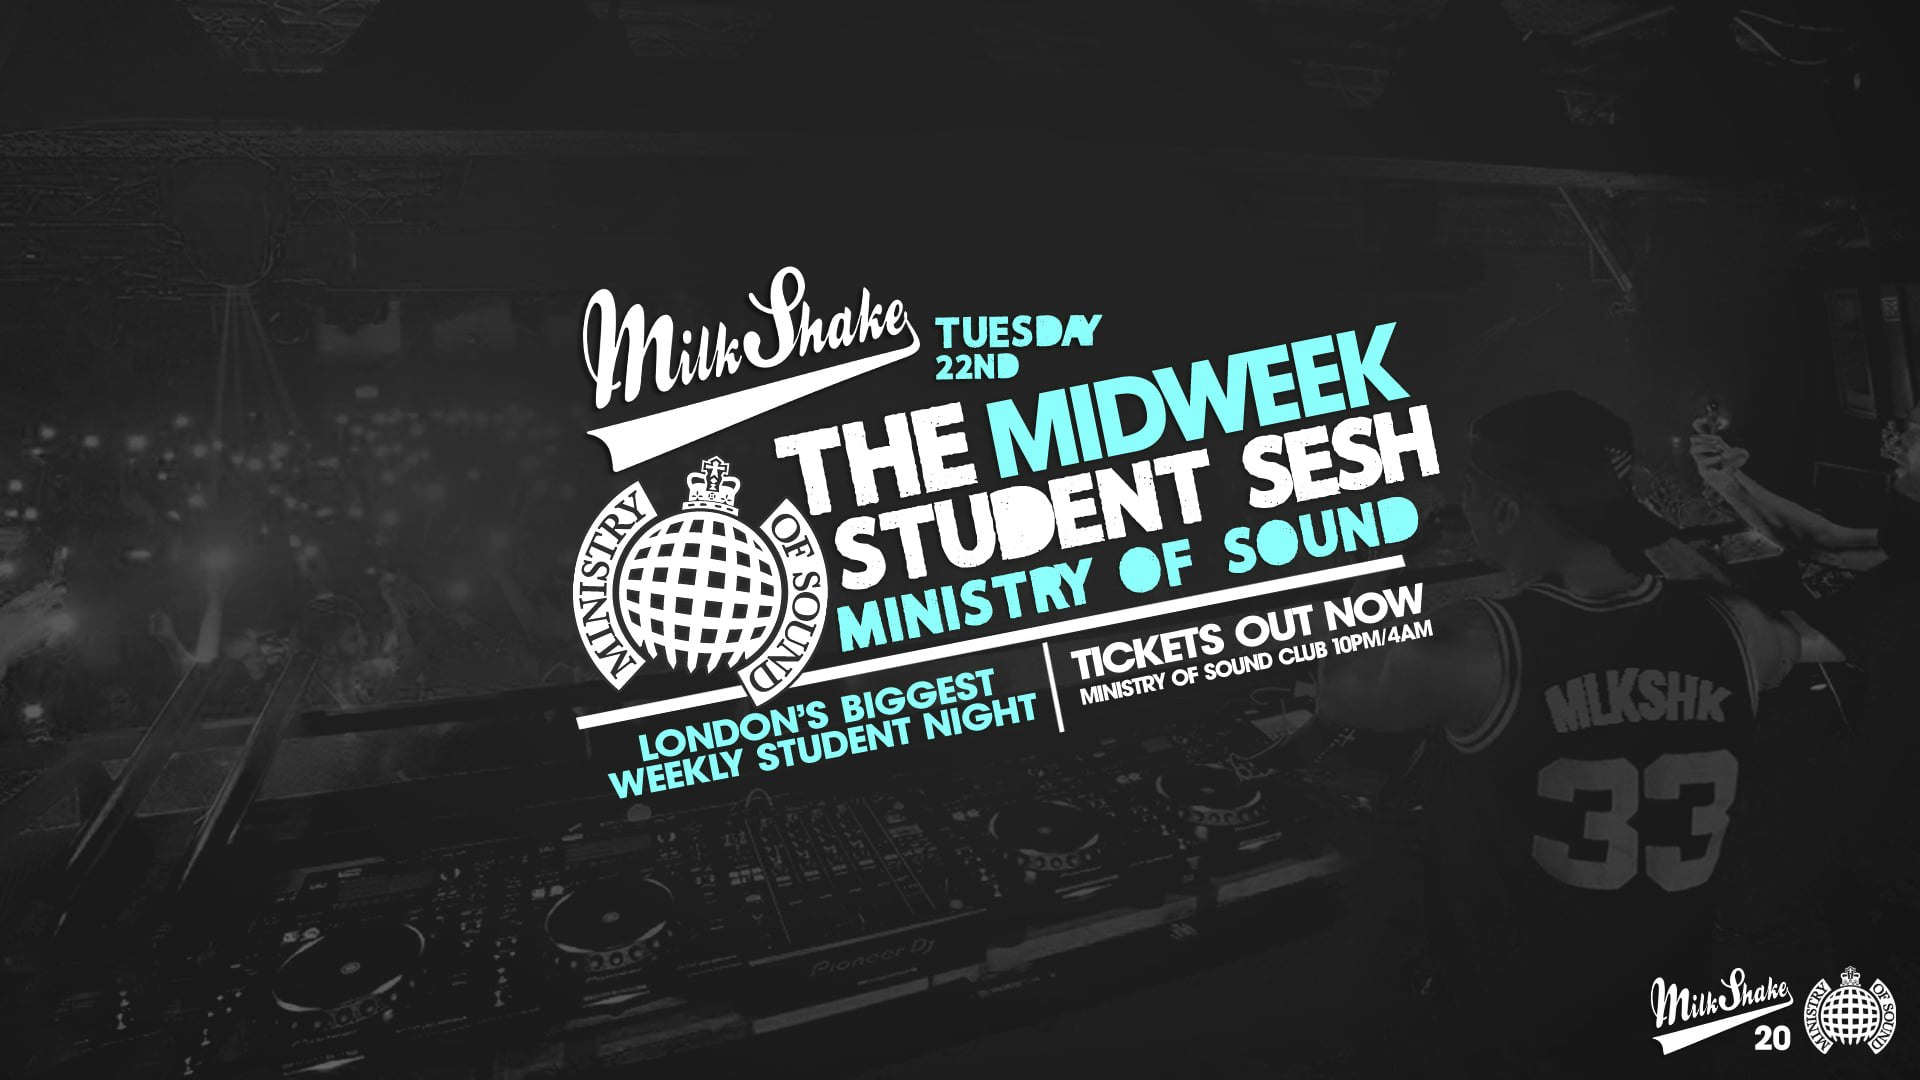 ⚠️ SOLD OUT ⚠️ Milkshake, Ministry of Sound | London’s Biggest Student Night – Feb 22nd 2022 ⚠️ SOLD OUT ⚠️